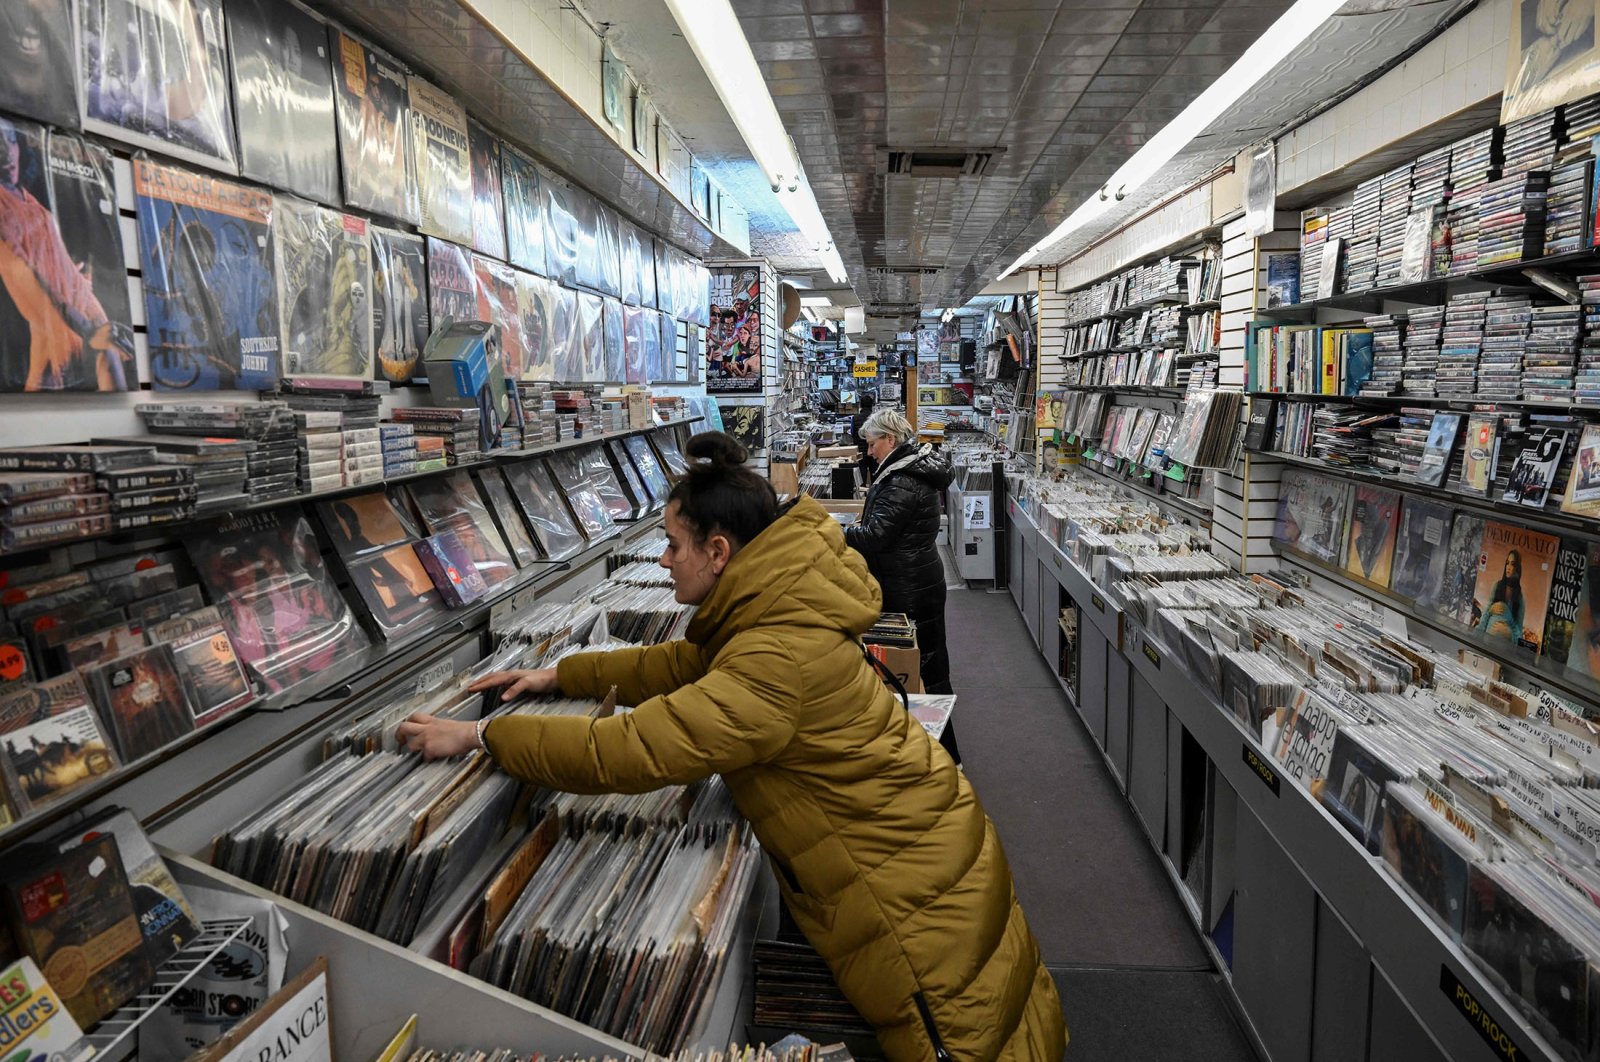 Celine Court browses through records at Village Revival Records in New York City, U.S., March 14, 2023. (AFP Photo)